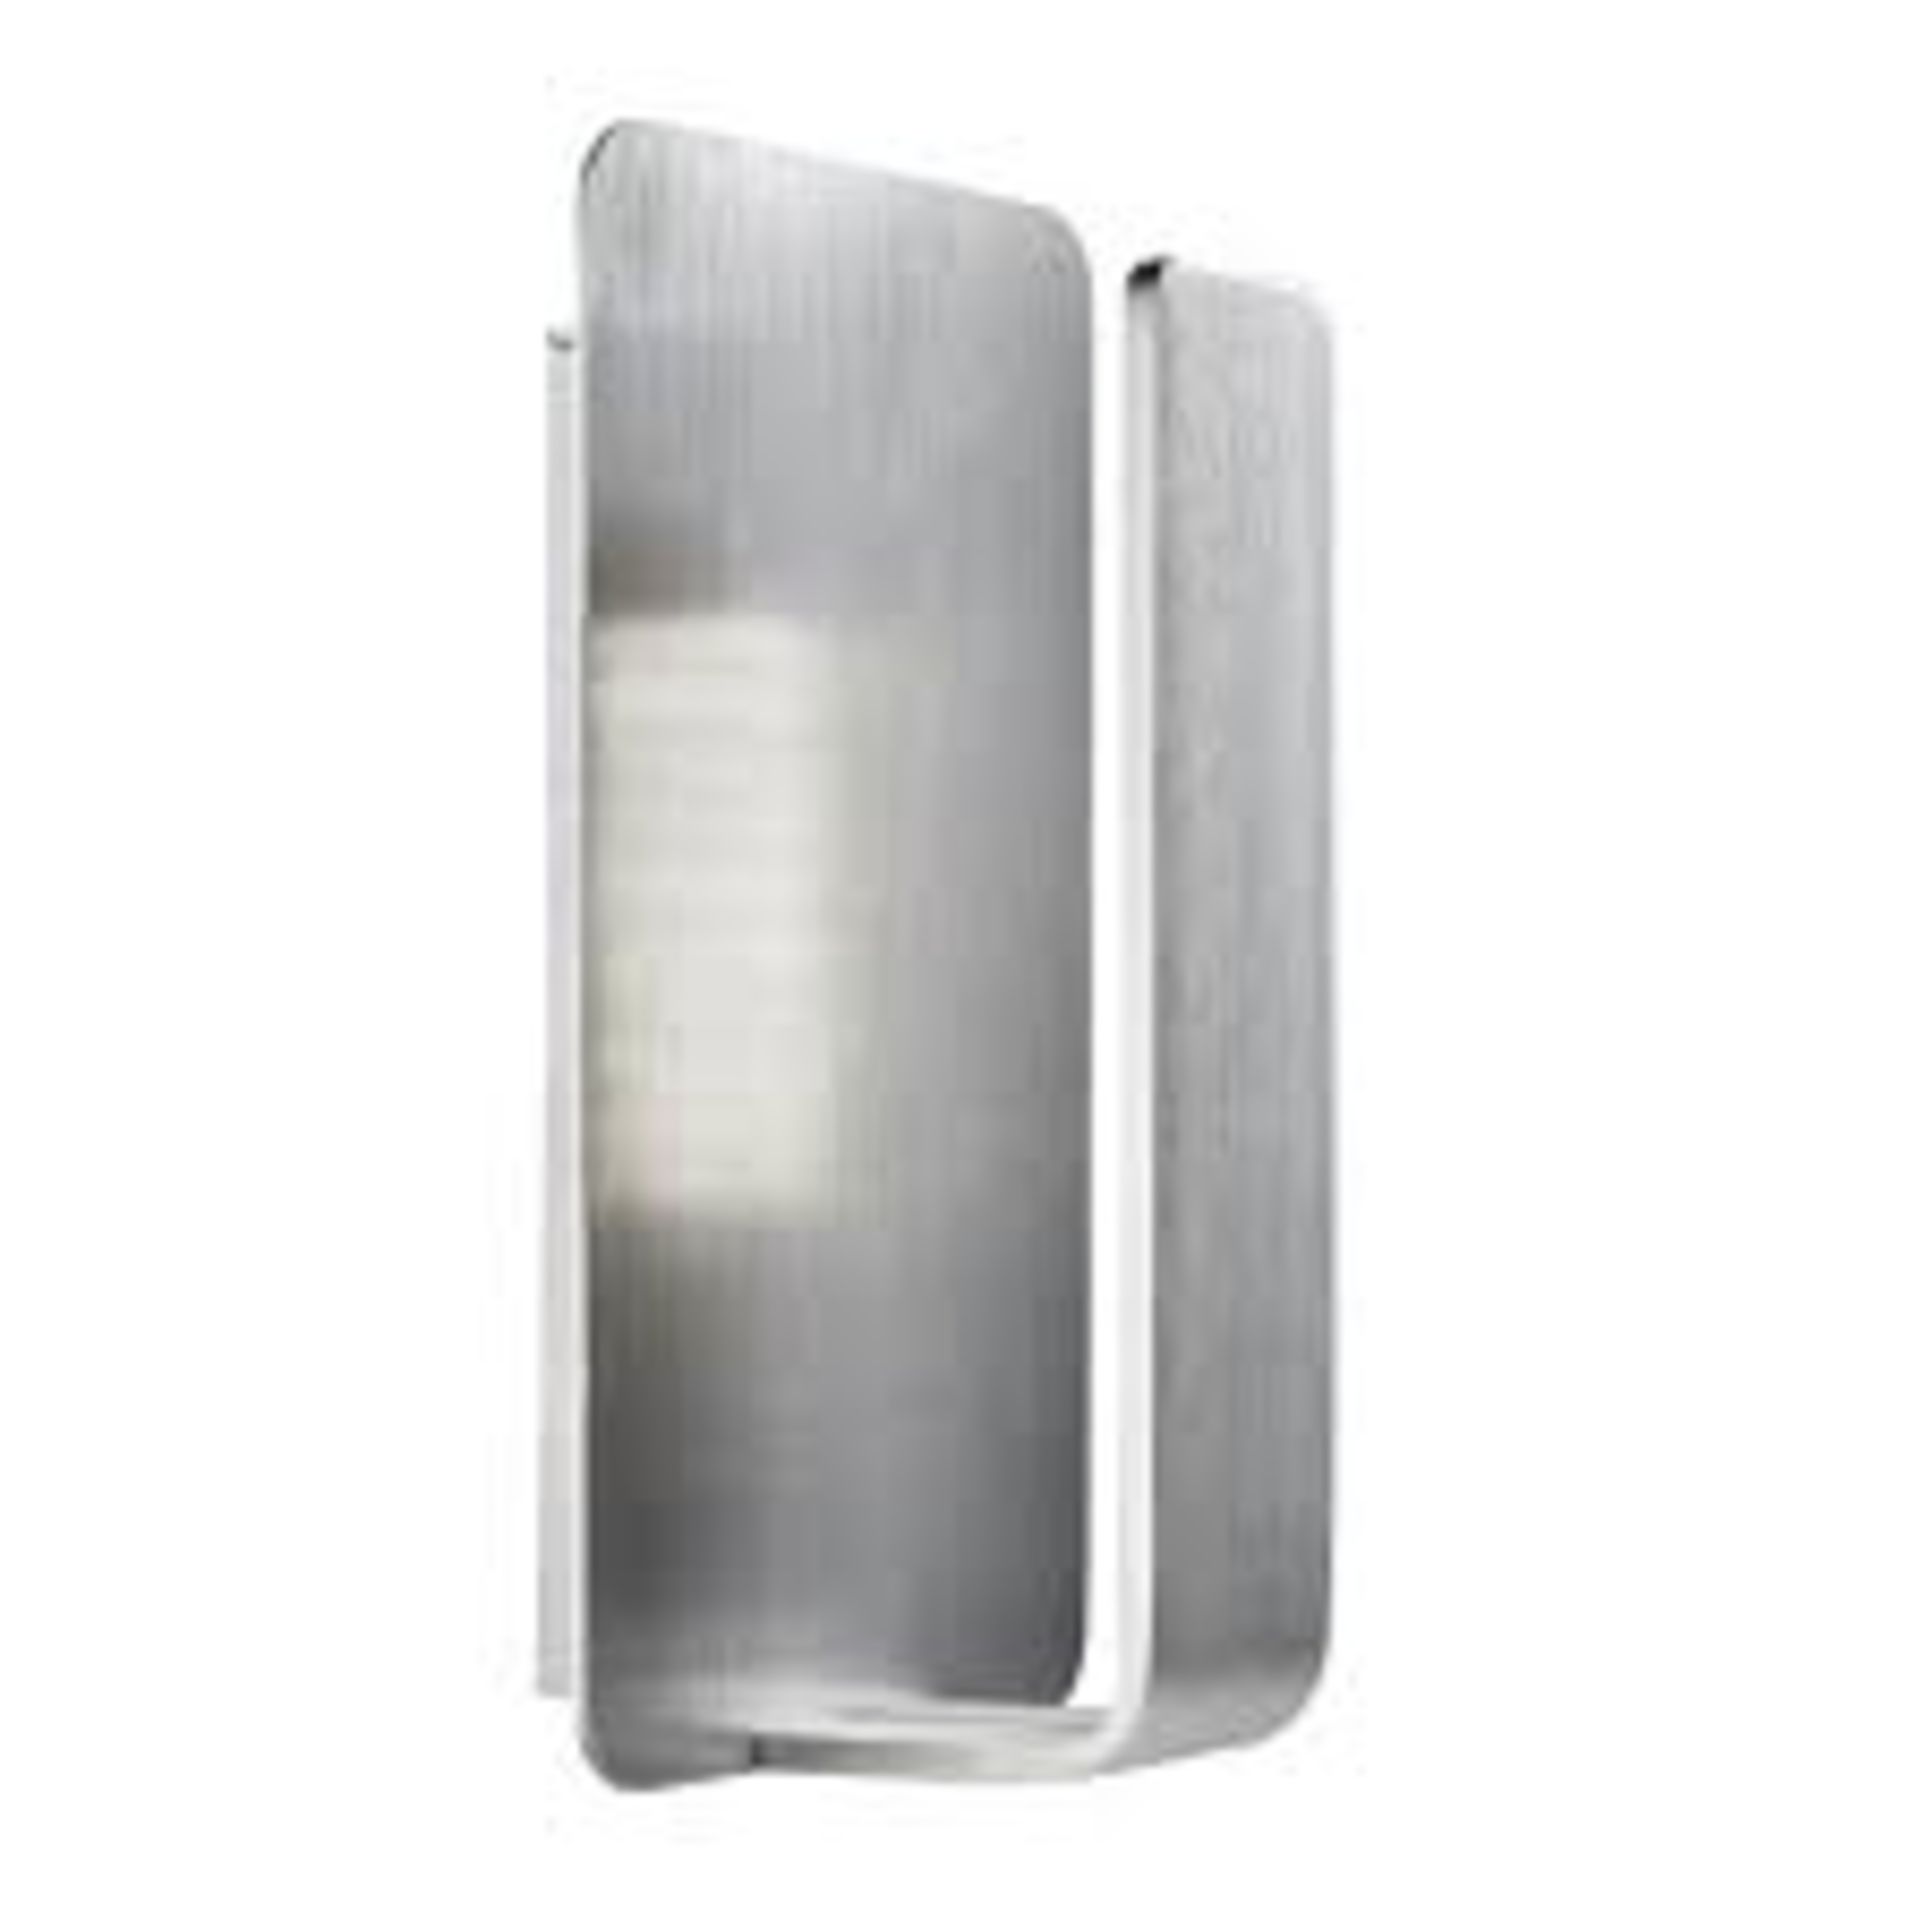 2 x Searchlight LED Wall Light in brushed aluminium- Ref: 1898SI - New and Boxed - RRP: £70(each) - Image 3 of 4